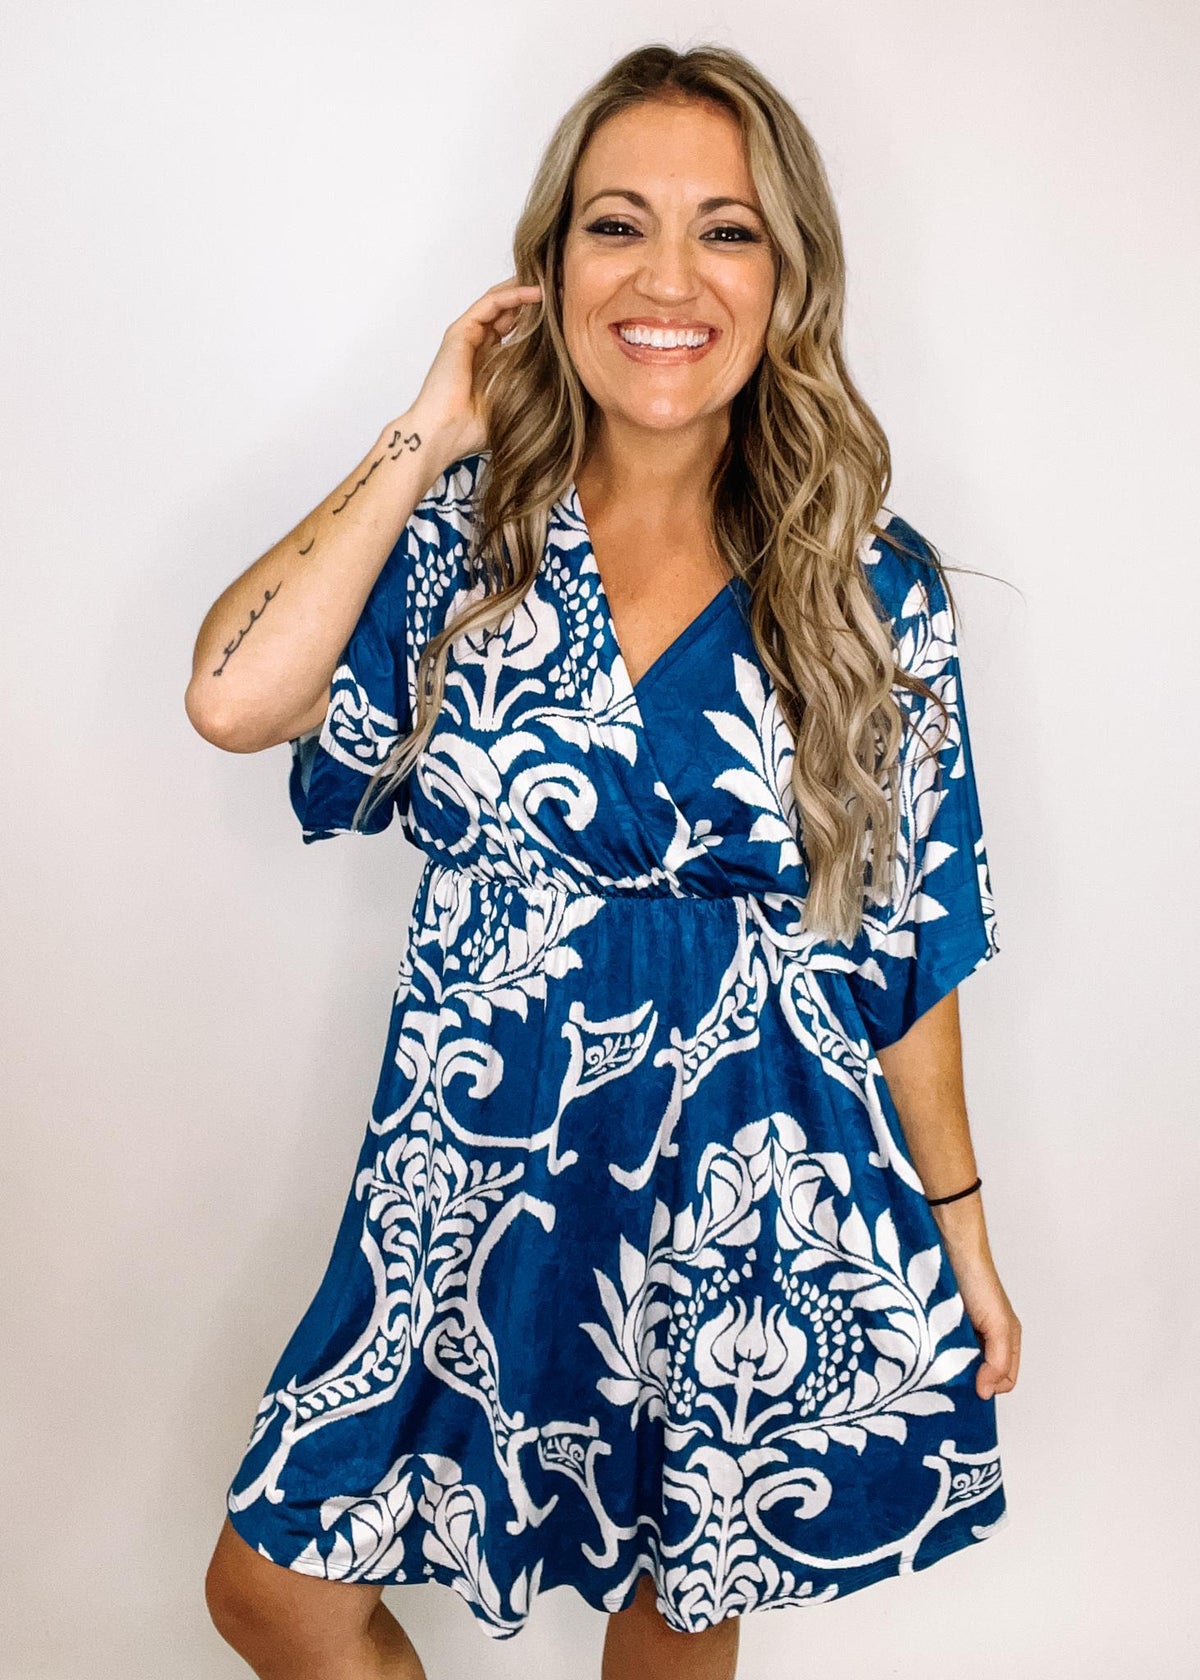 Blue and white Floral Wrap Dress